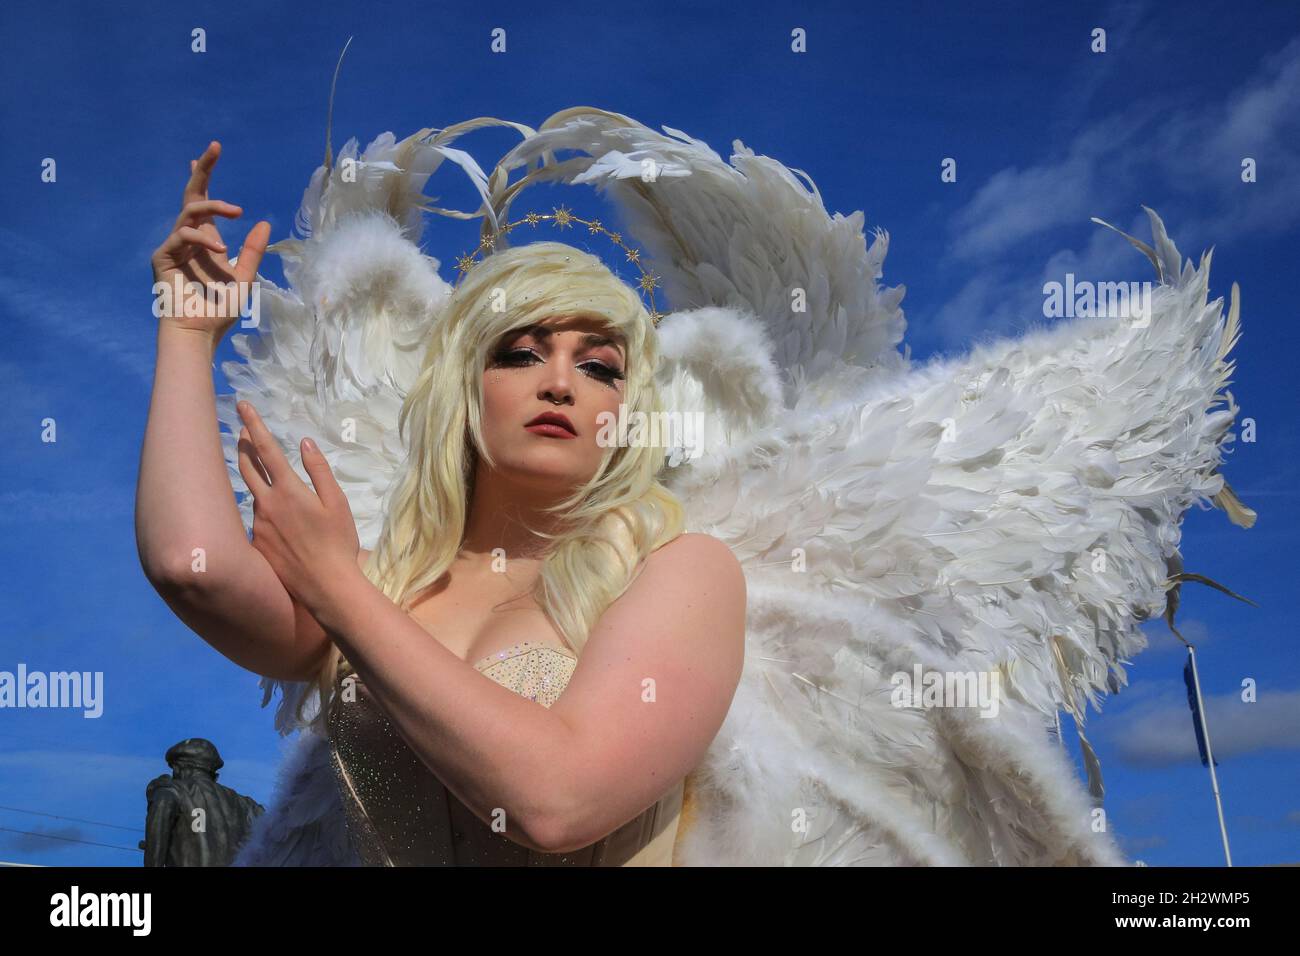 ExCel, London, UK. 24th Oct, 2021. A fan poses as Ryo from Devilman Crybaby. Cosplayers and fans of anime, sci-fi, games, and all things pop culture once again descend on the ExCel exhibition centre in London for MCM Comic Con London on its last day. Credit: Imageplotter/Alamy Live News Stock Photo